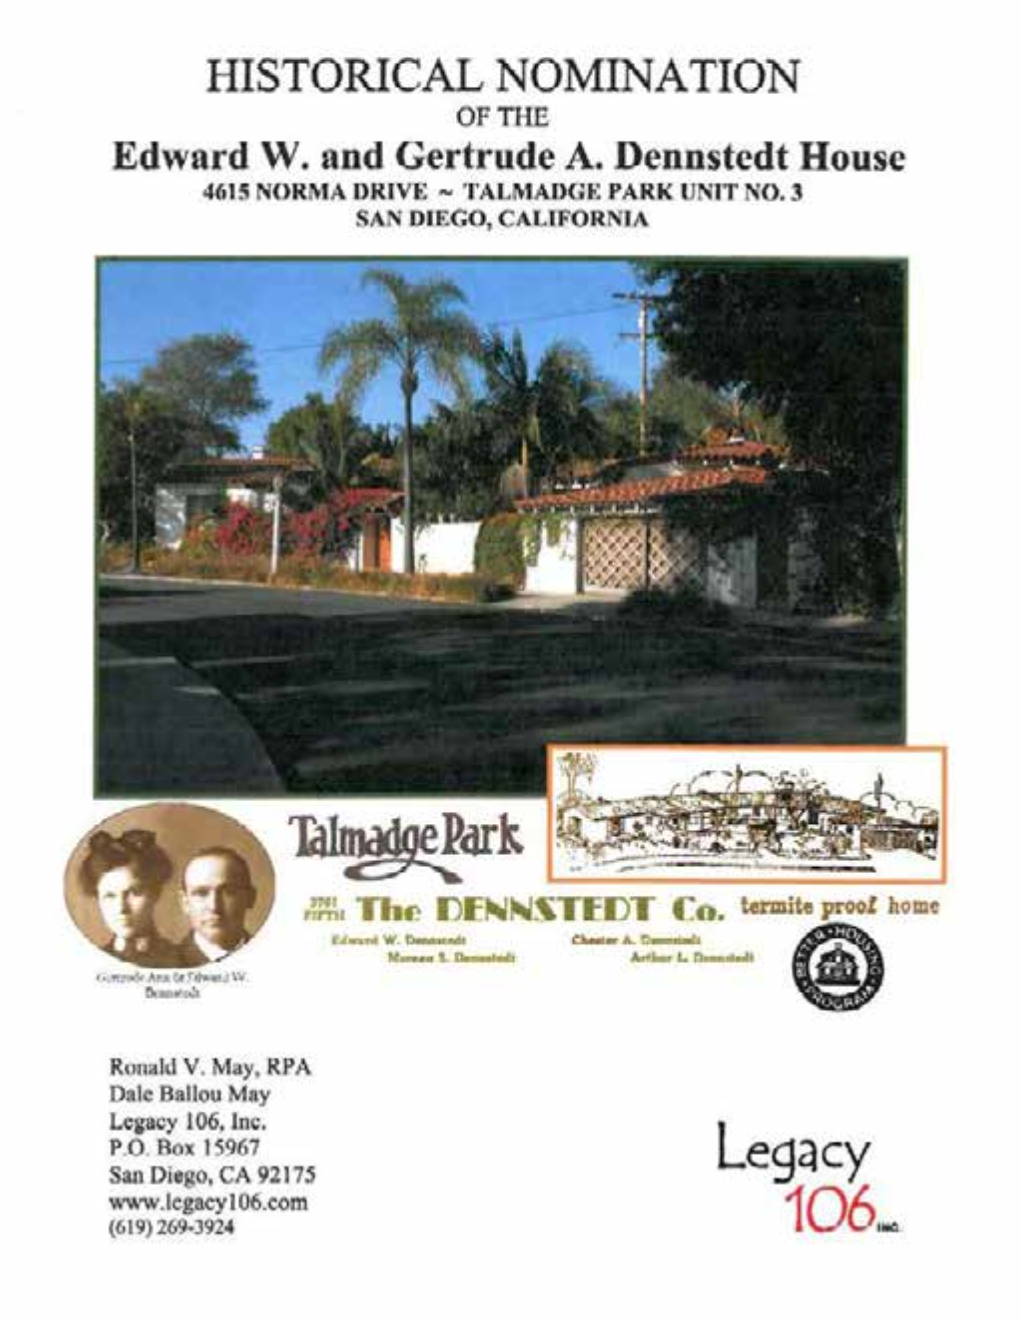 Edward W. and Gertrude A. Dennstedt House 4615 NORMA DRIVE - TALMADGE PARK UNIT NO.3 SAN DIEGO, CALIFORNIA